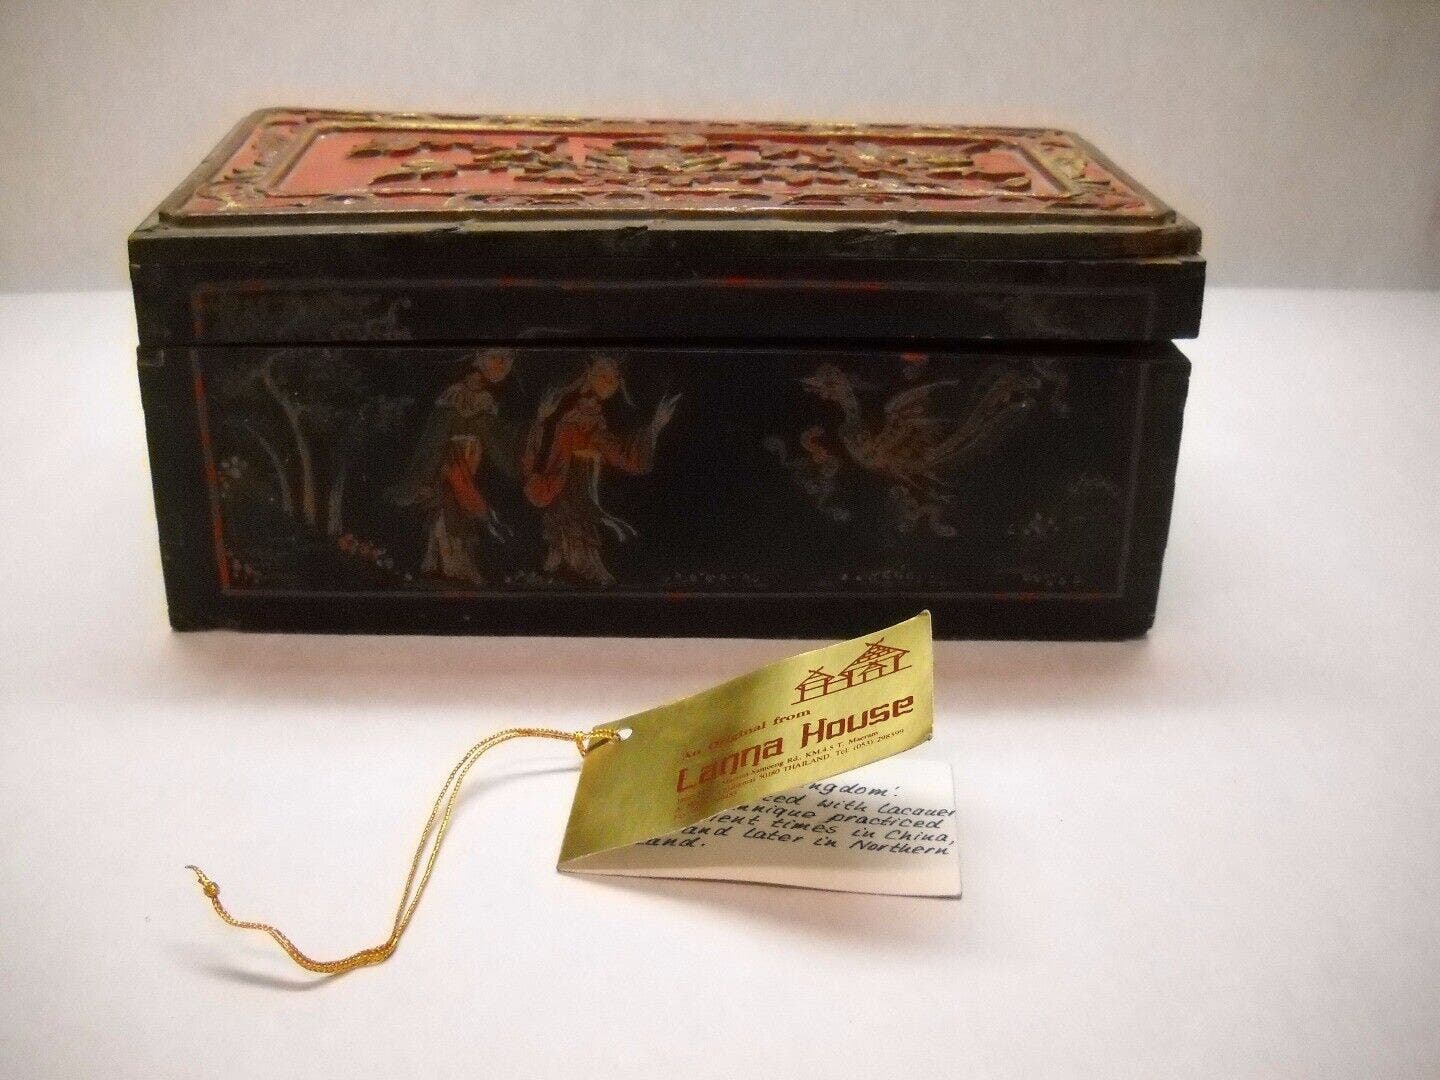 Primary image for ANTIQUE Lacquered CHINESE Wooden BOX Carved TOP 19TH CENTURY Carved TOP